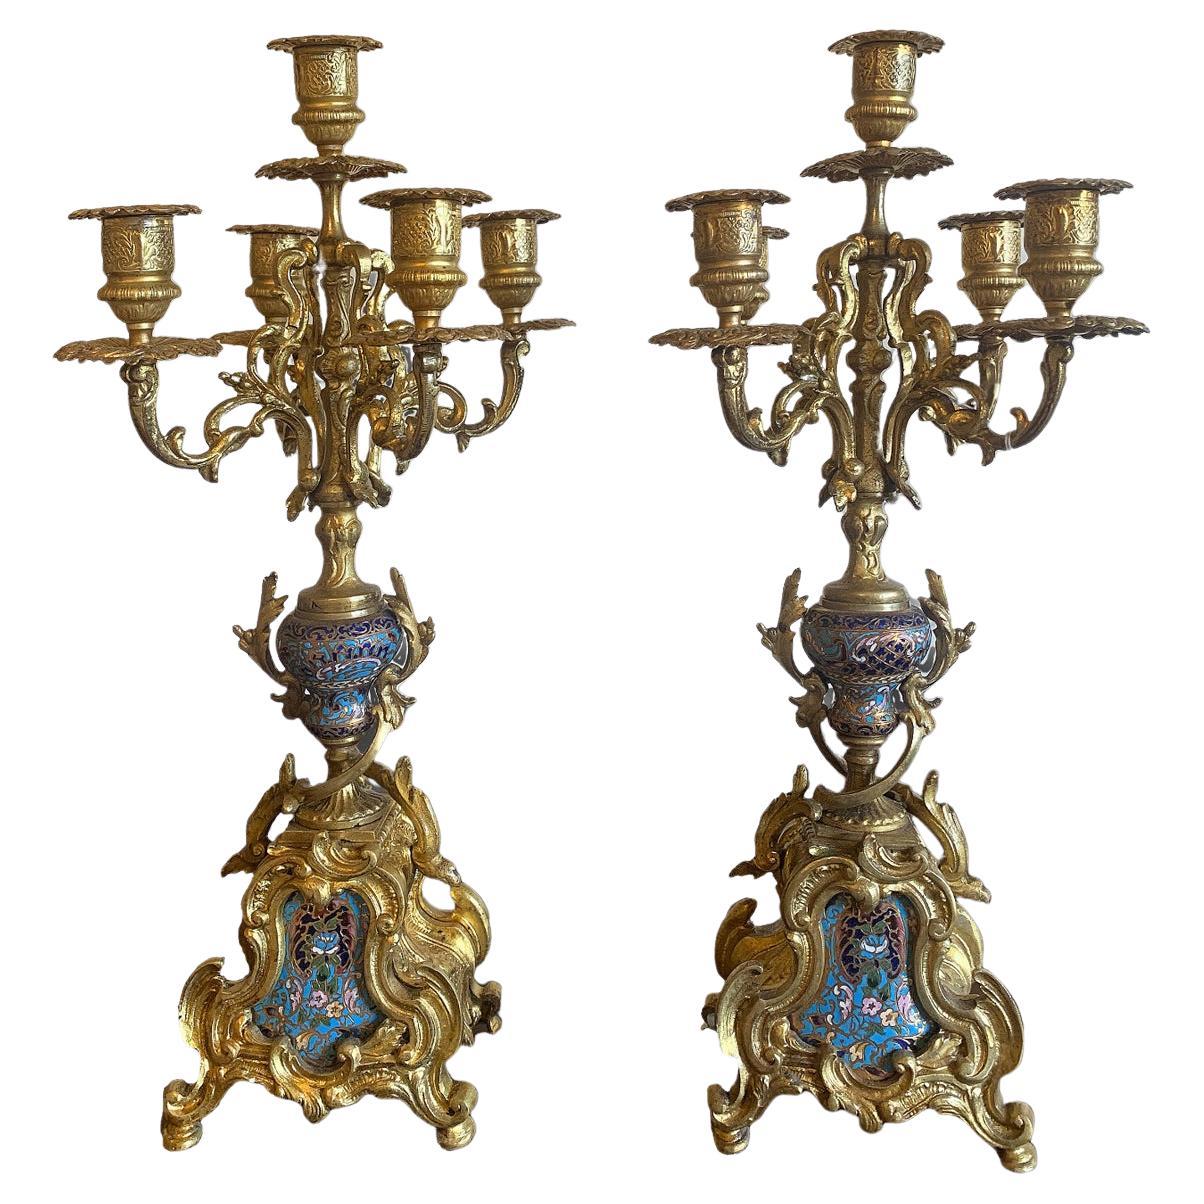 19th Century Pair of Candlesticks With Glassonné Inserts